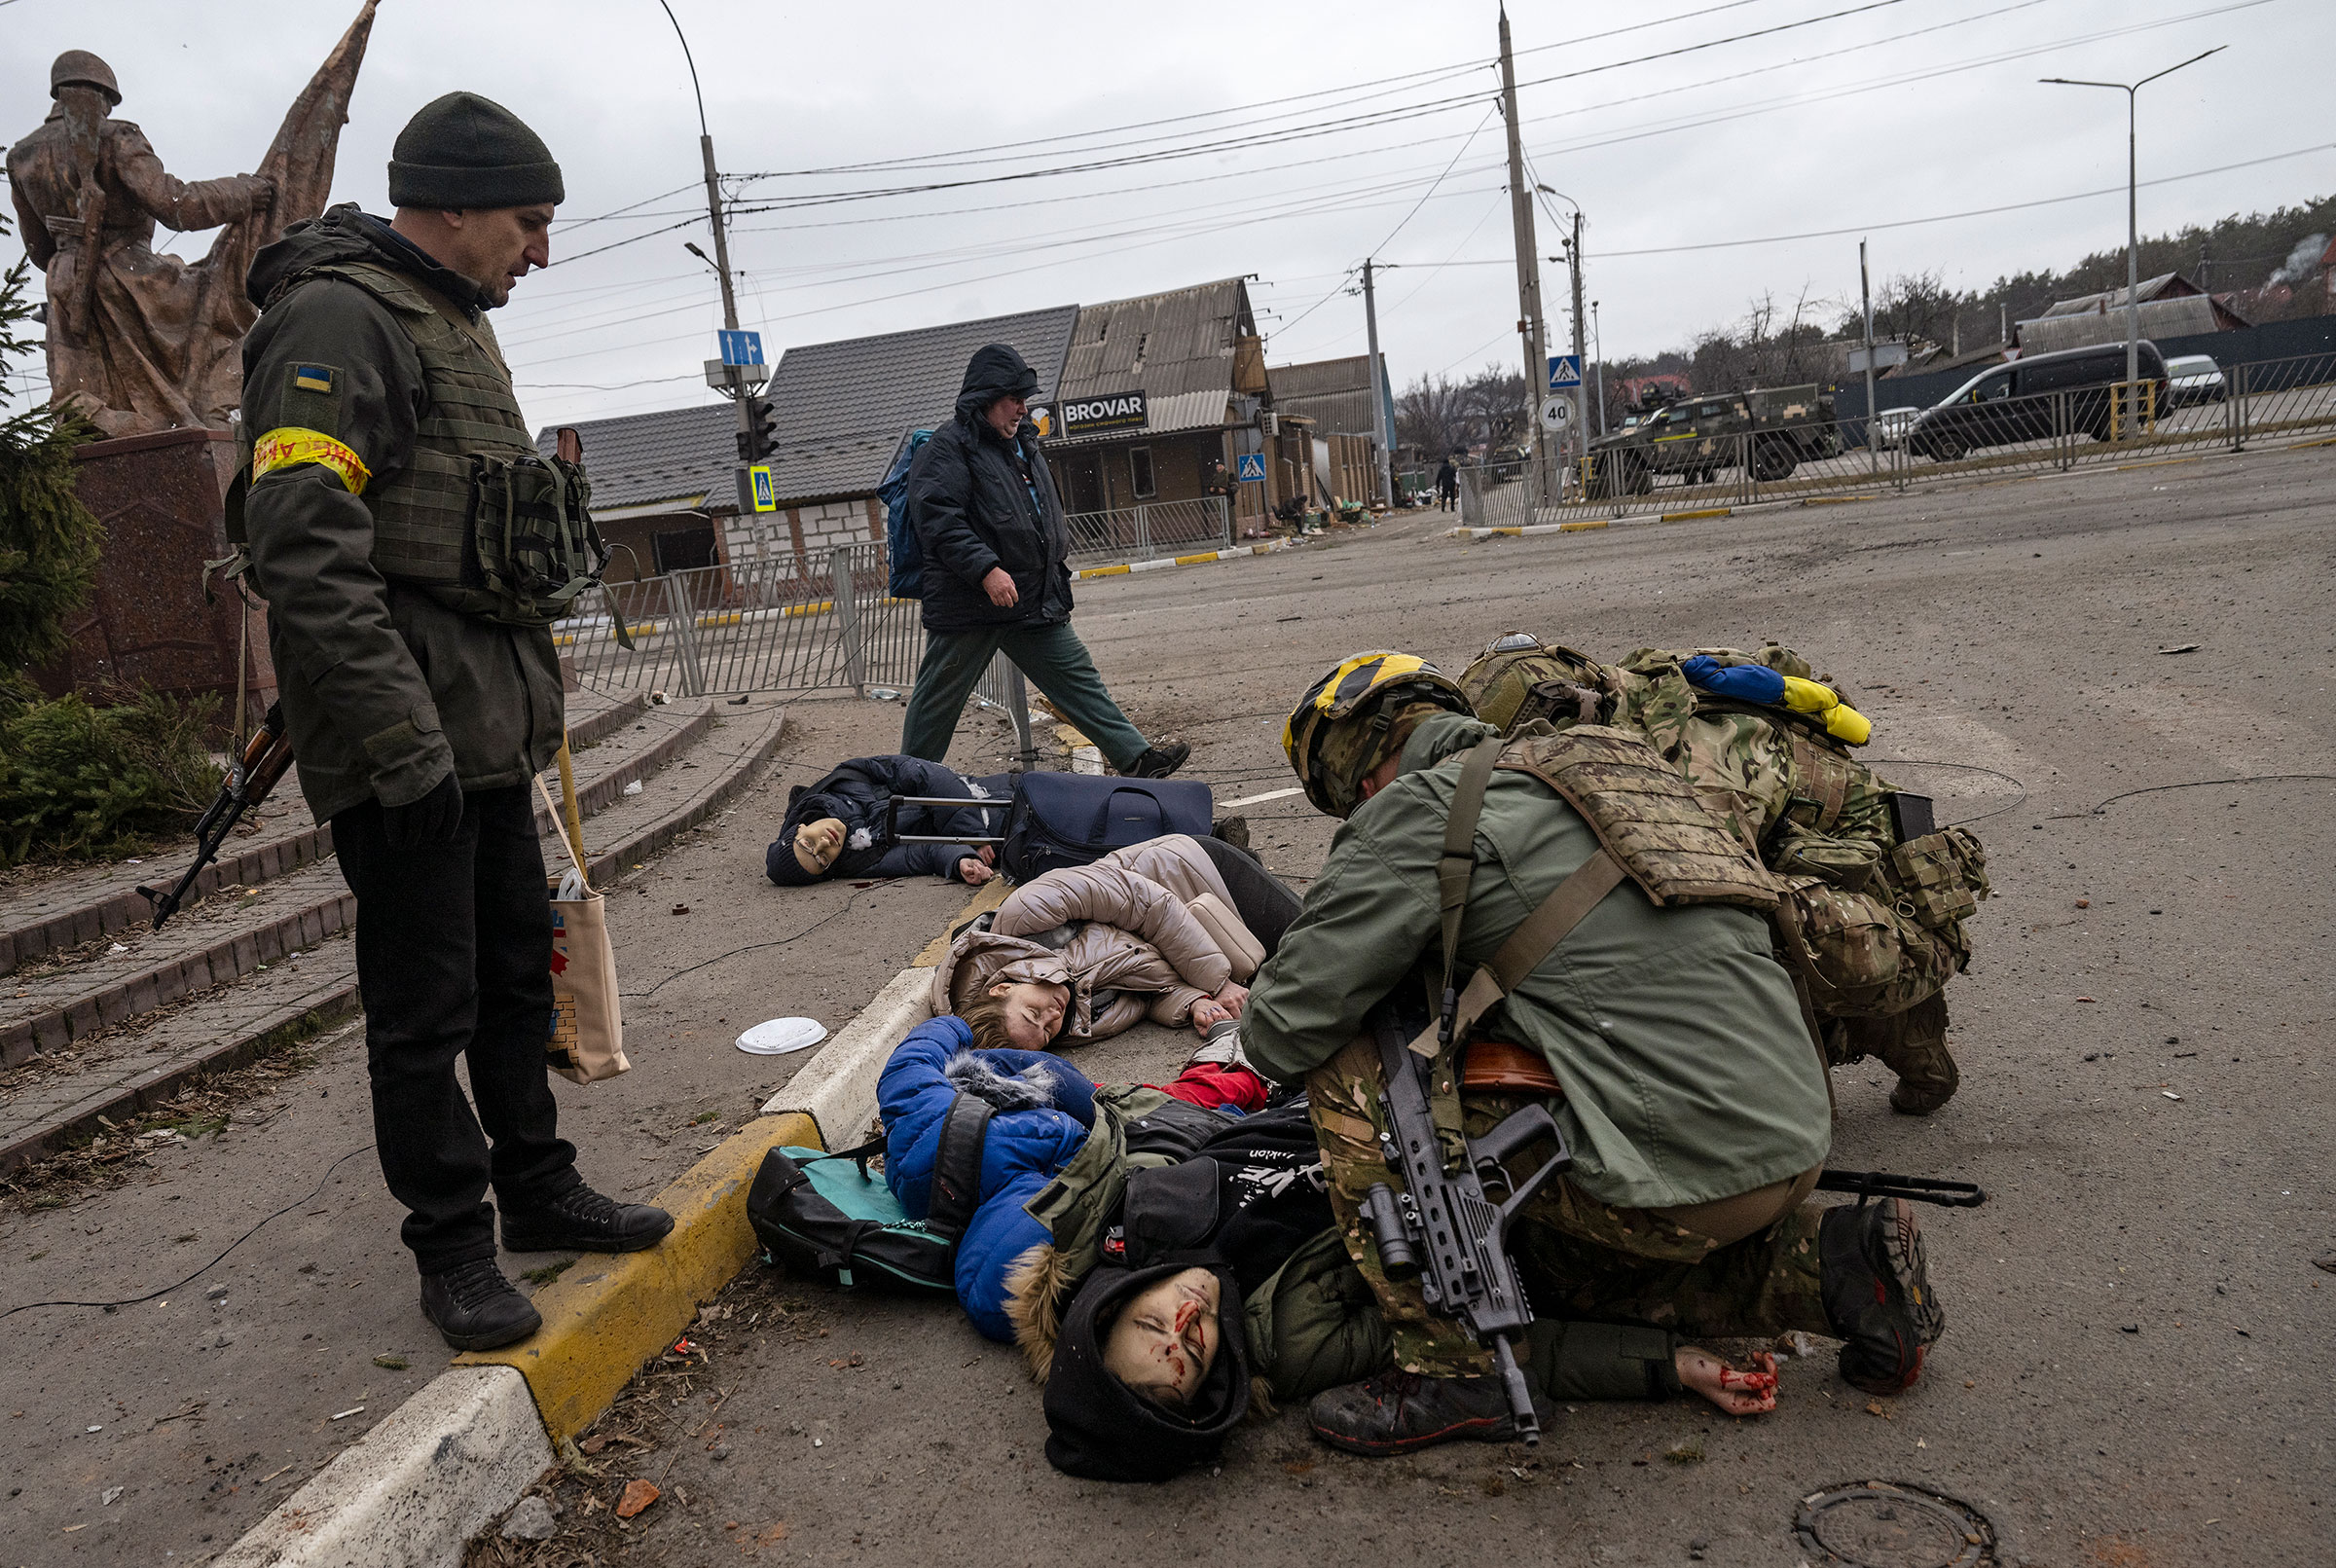 Ukrainian soldiers attend to a group of civilians, including Tetiana Perebyinis and her two children, who were mortally wounded by a Russian mortar round while they evacuated from Irpin, Ukraine, on March 6. A volunteer assisting the family was also killed. (Lynsey Addario—Getty Images)